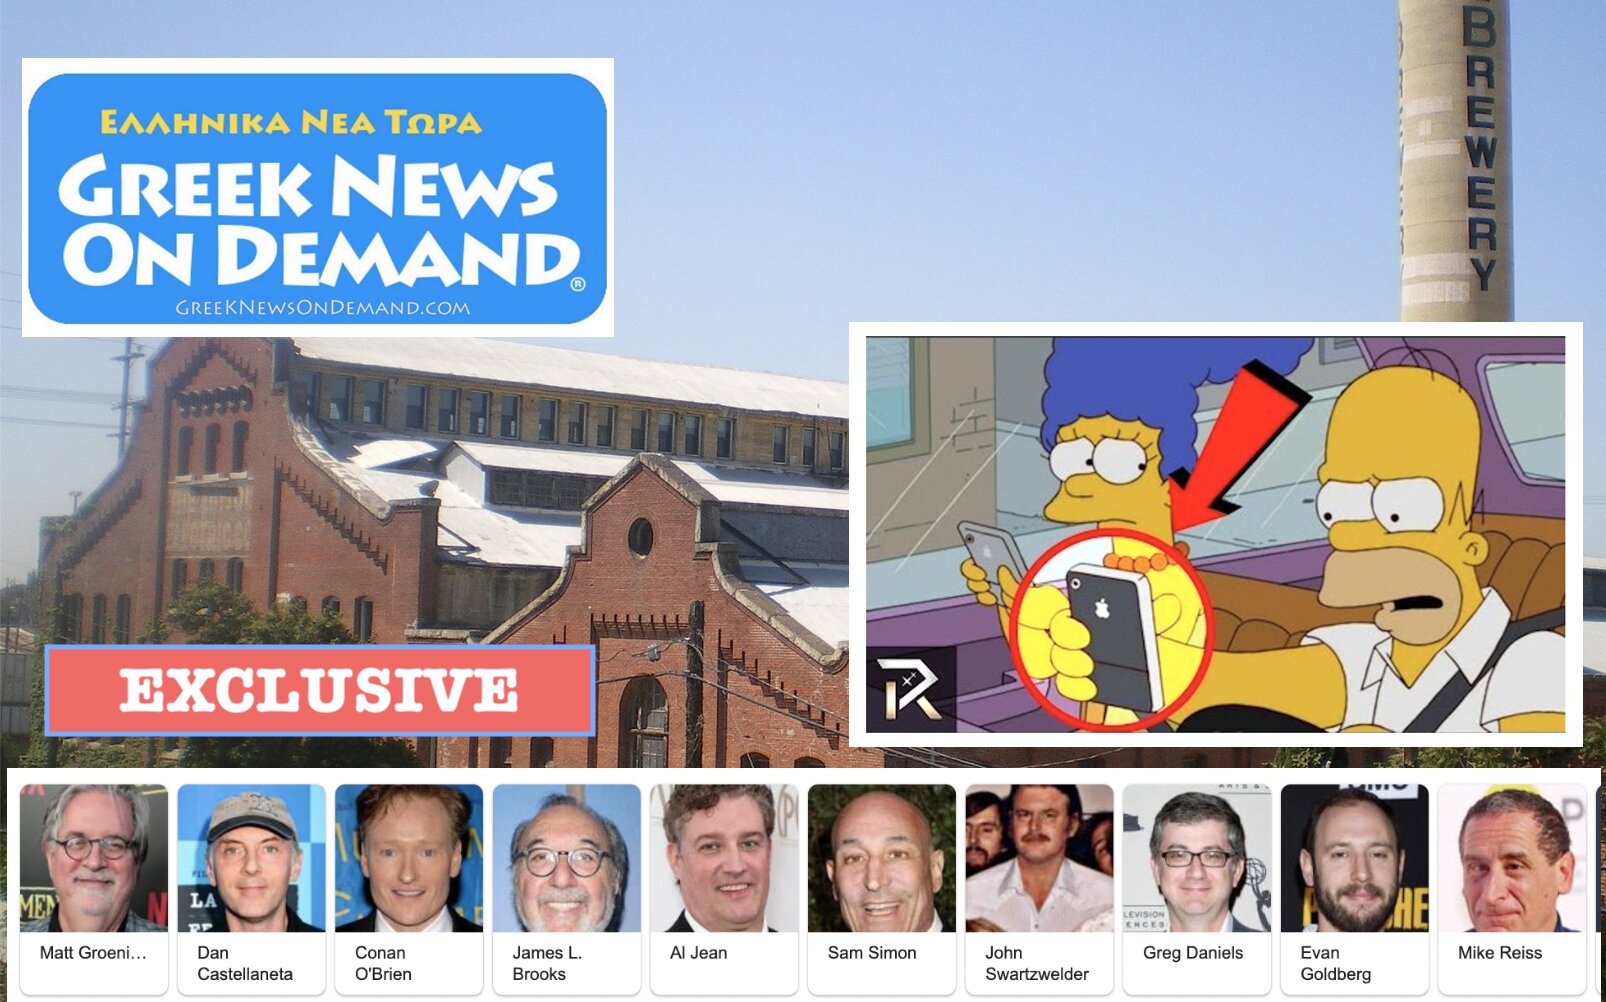 EXCLUSIVE INTEL on the Simpsons’ writers headquarters and modus operandi in “predicting” future events